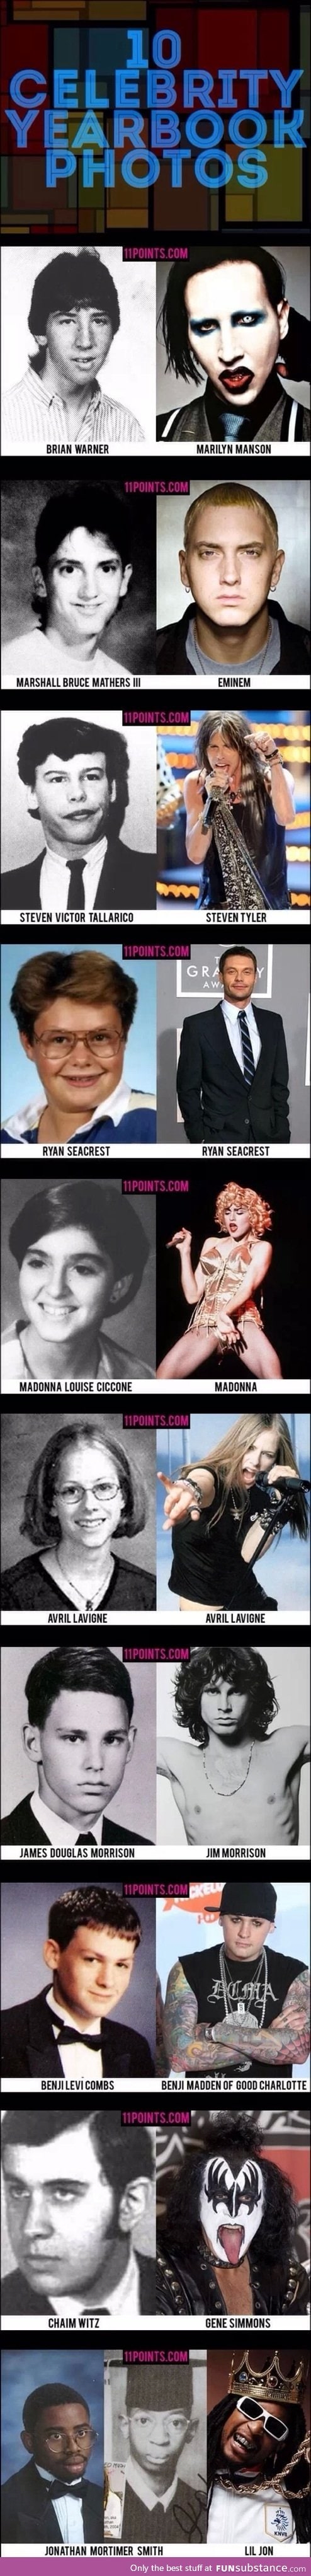 Celeb Yearbook Photos Then and Now